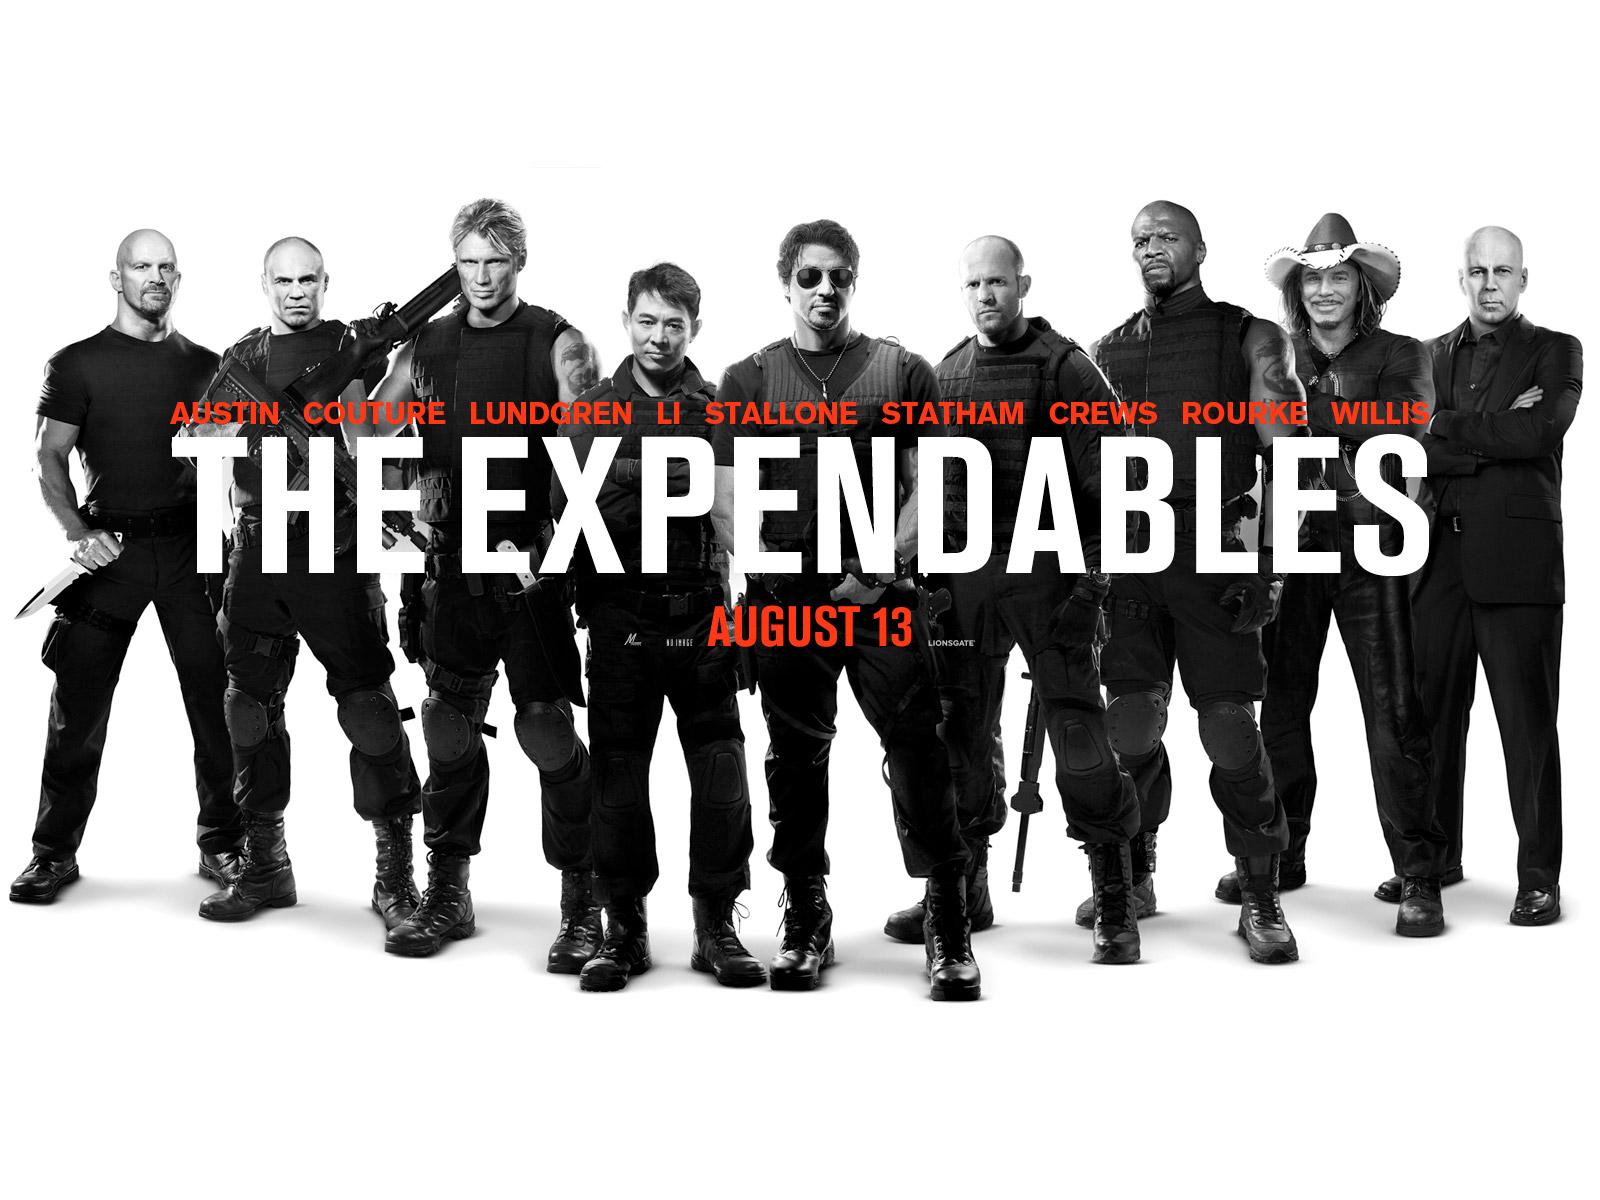 The Expendables Art